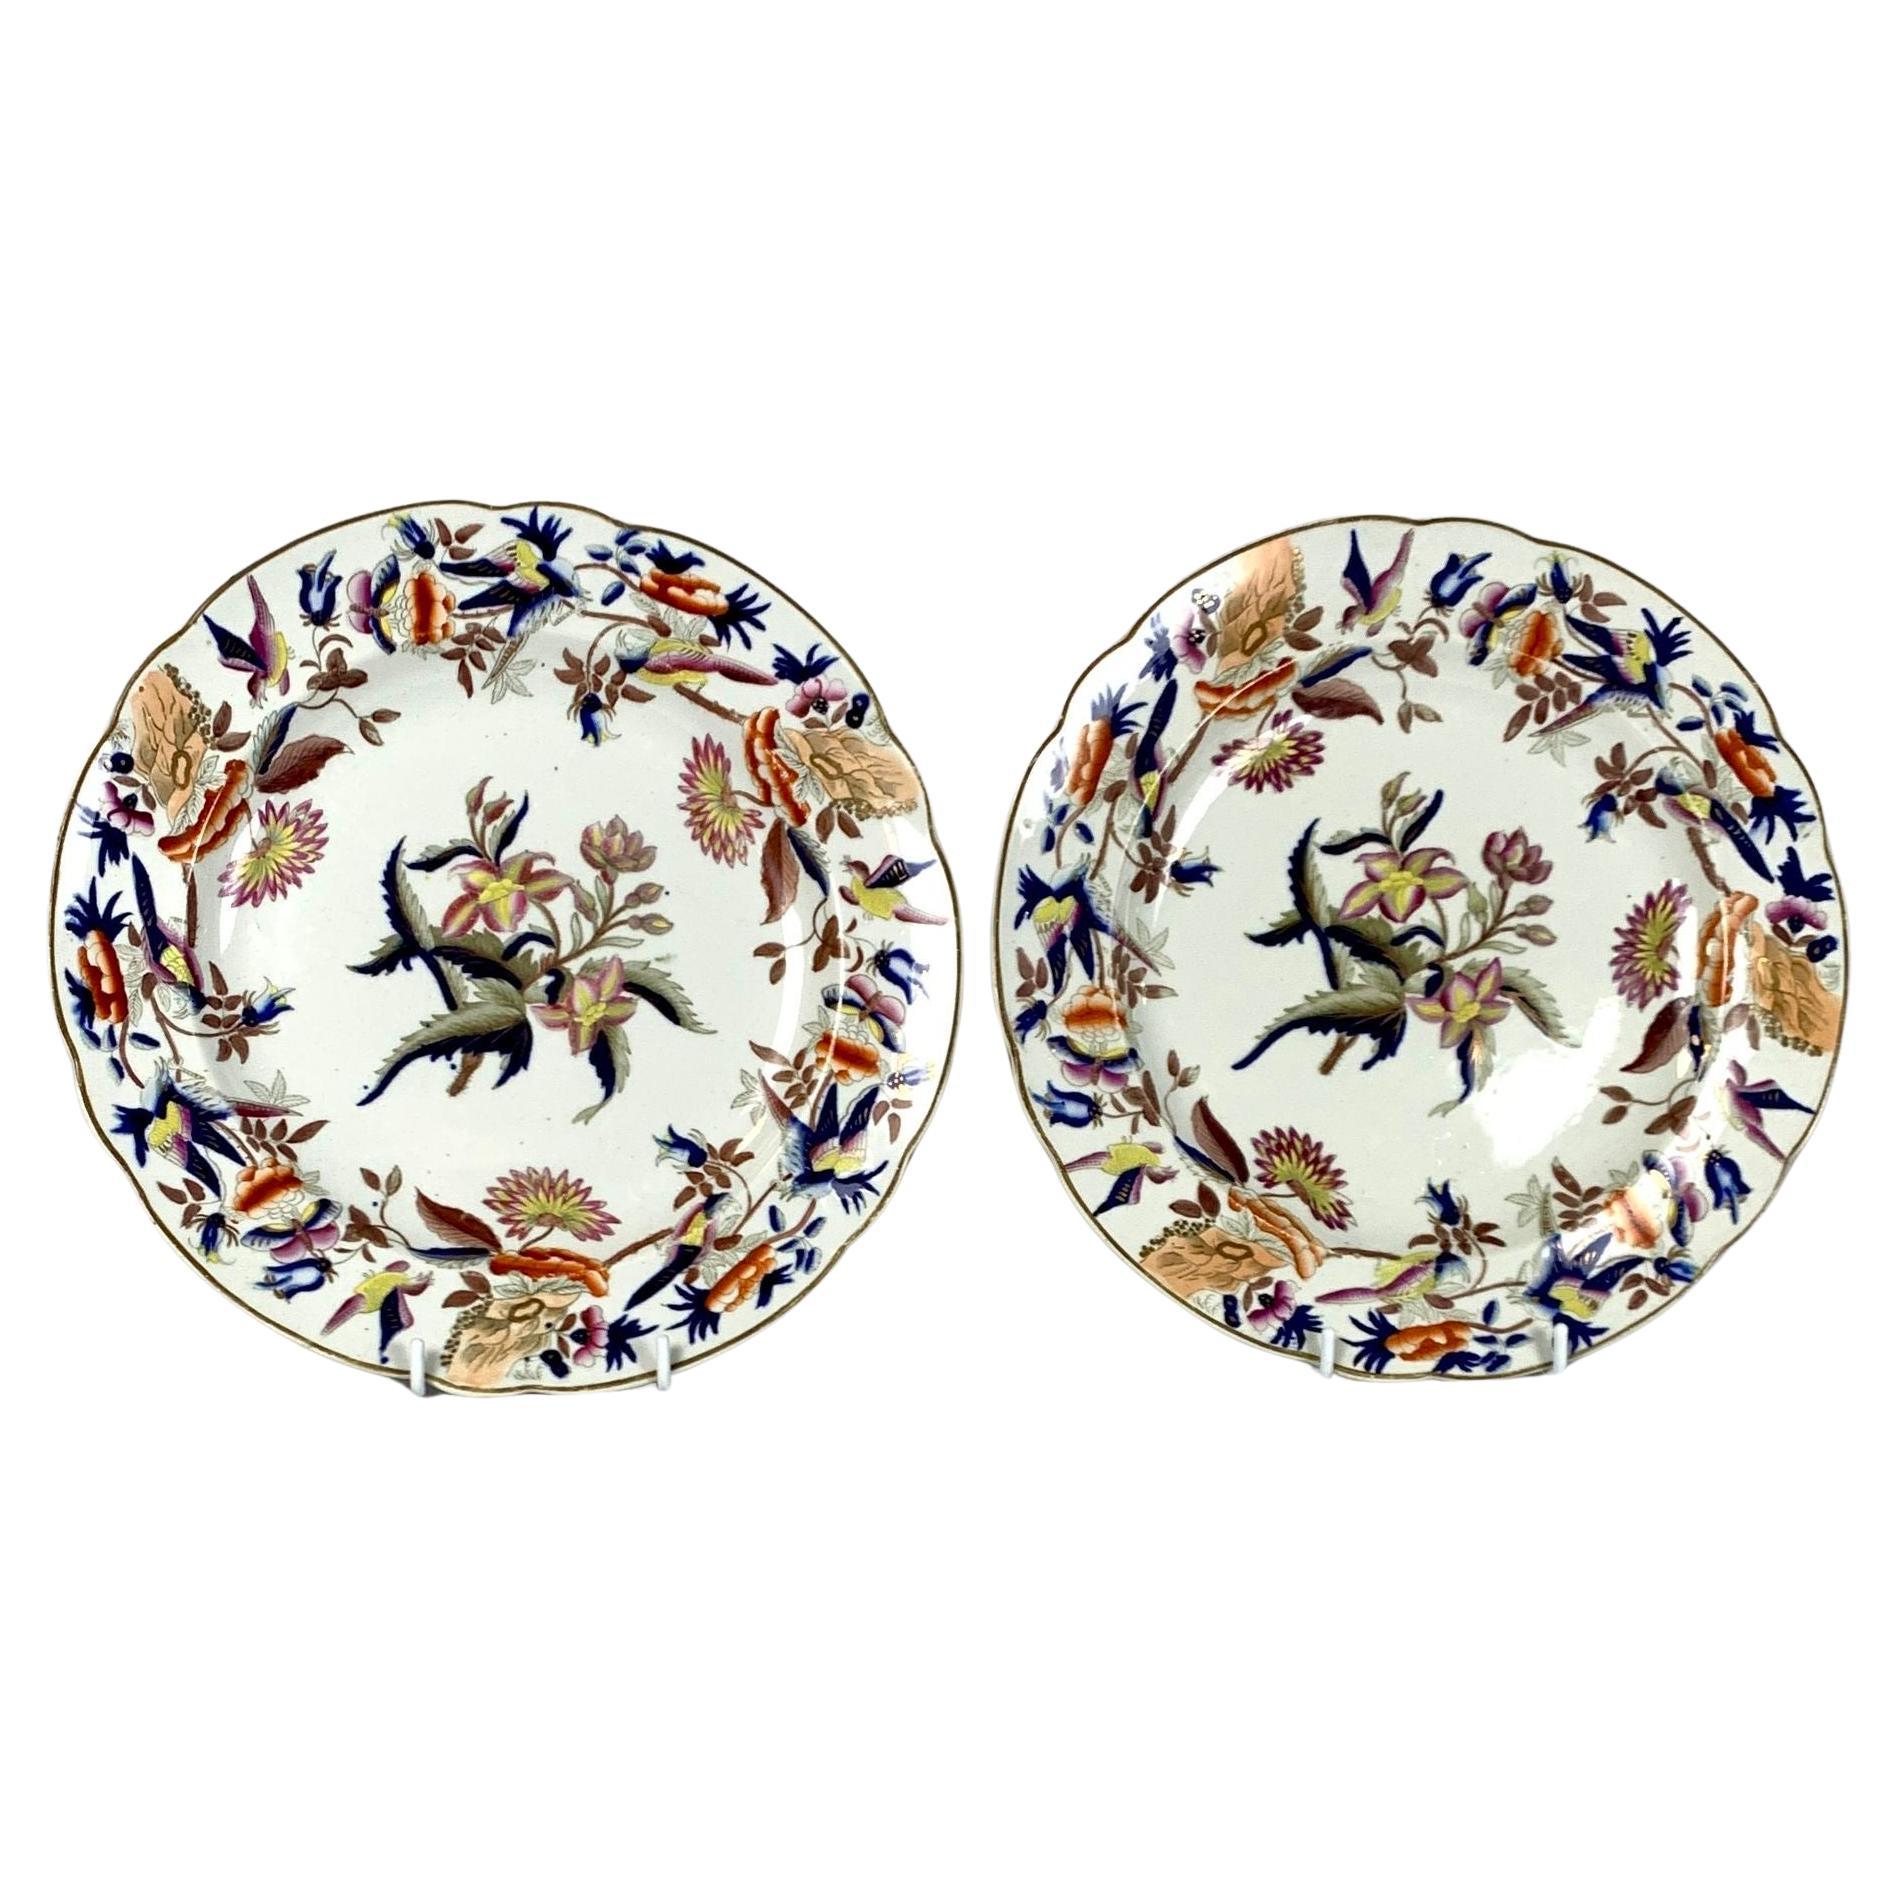 Pair of Colorful Ironstone Plates "Late Spode" England Circa 1835 For Sale